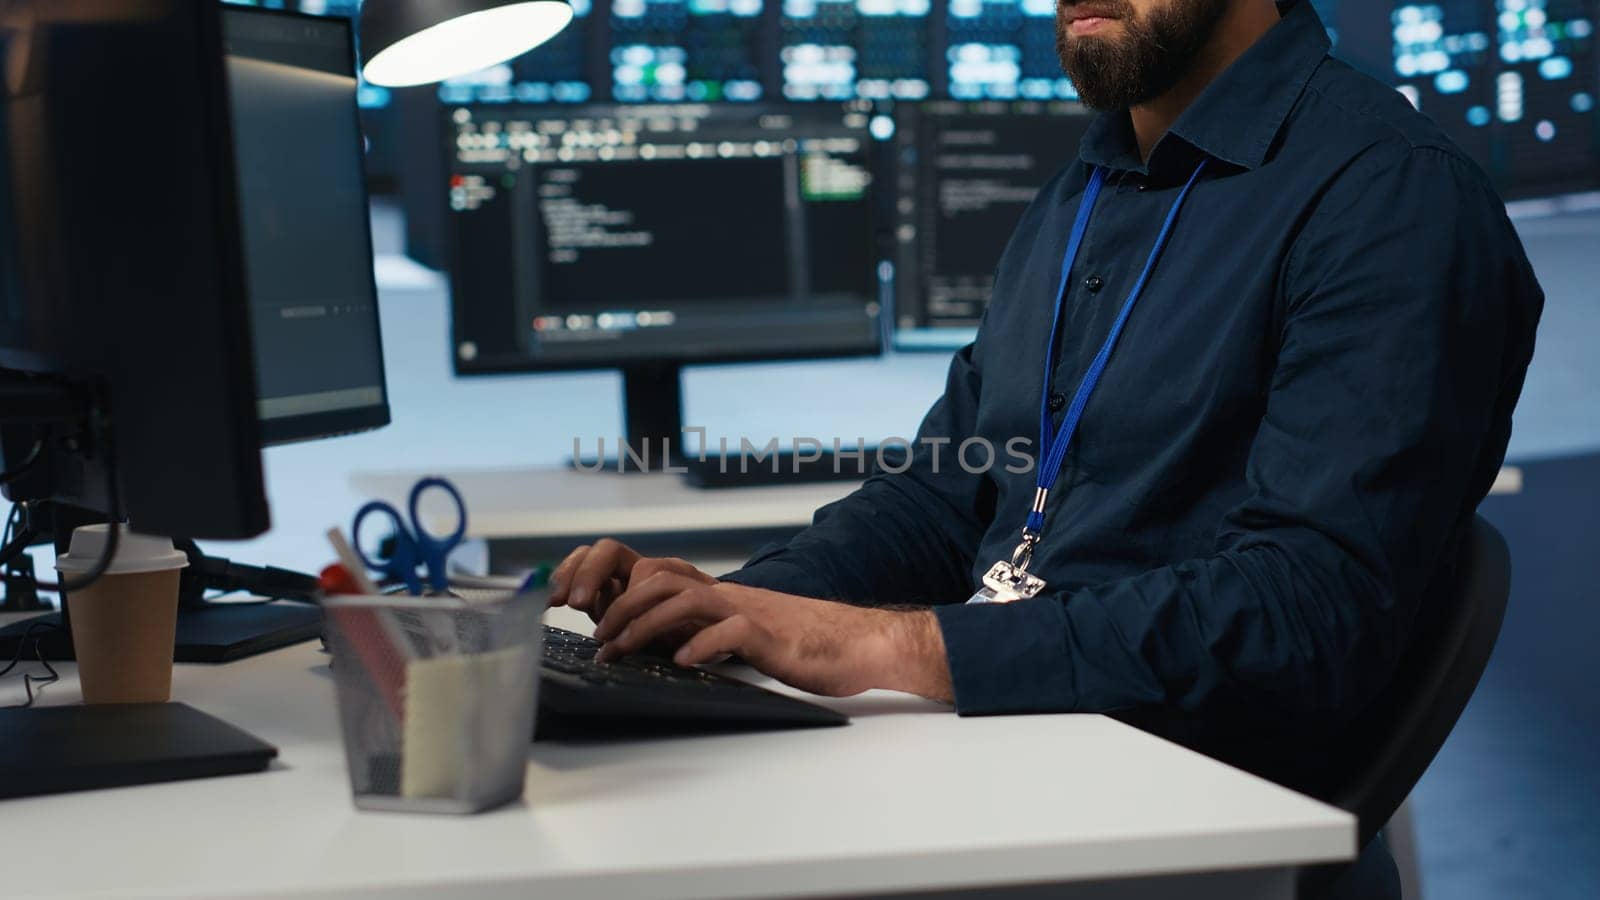 Proficient technician overseeing server room, running code on computer, troubleshooting servers. Software developer upgrading hardware clusters, networking systems and storage arrays